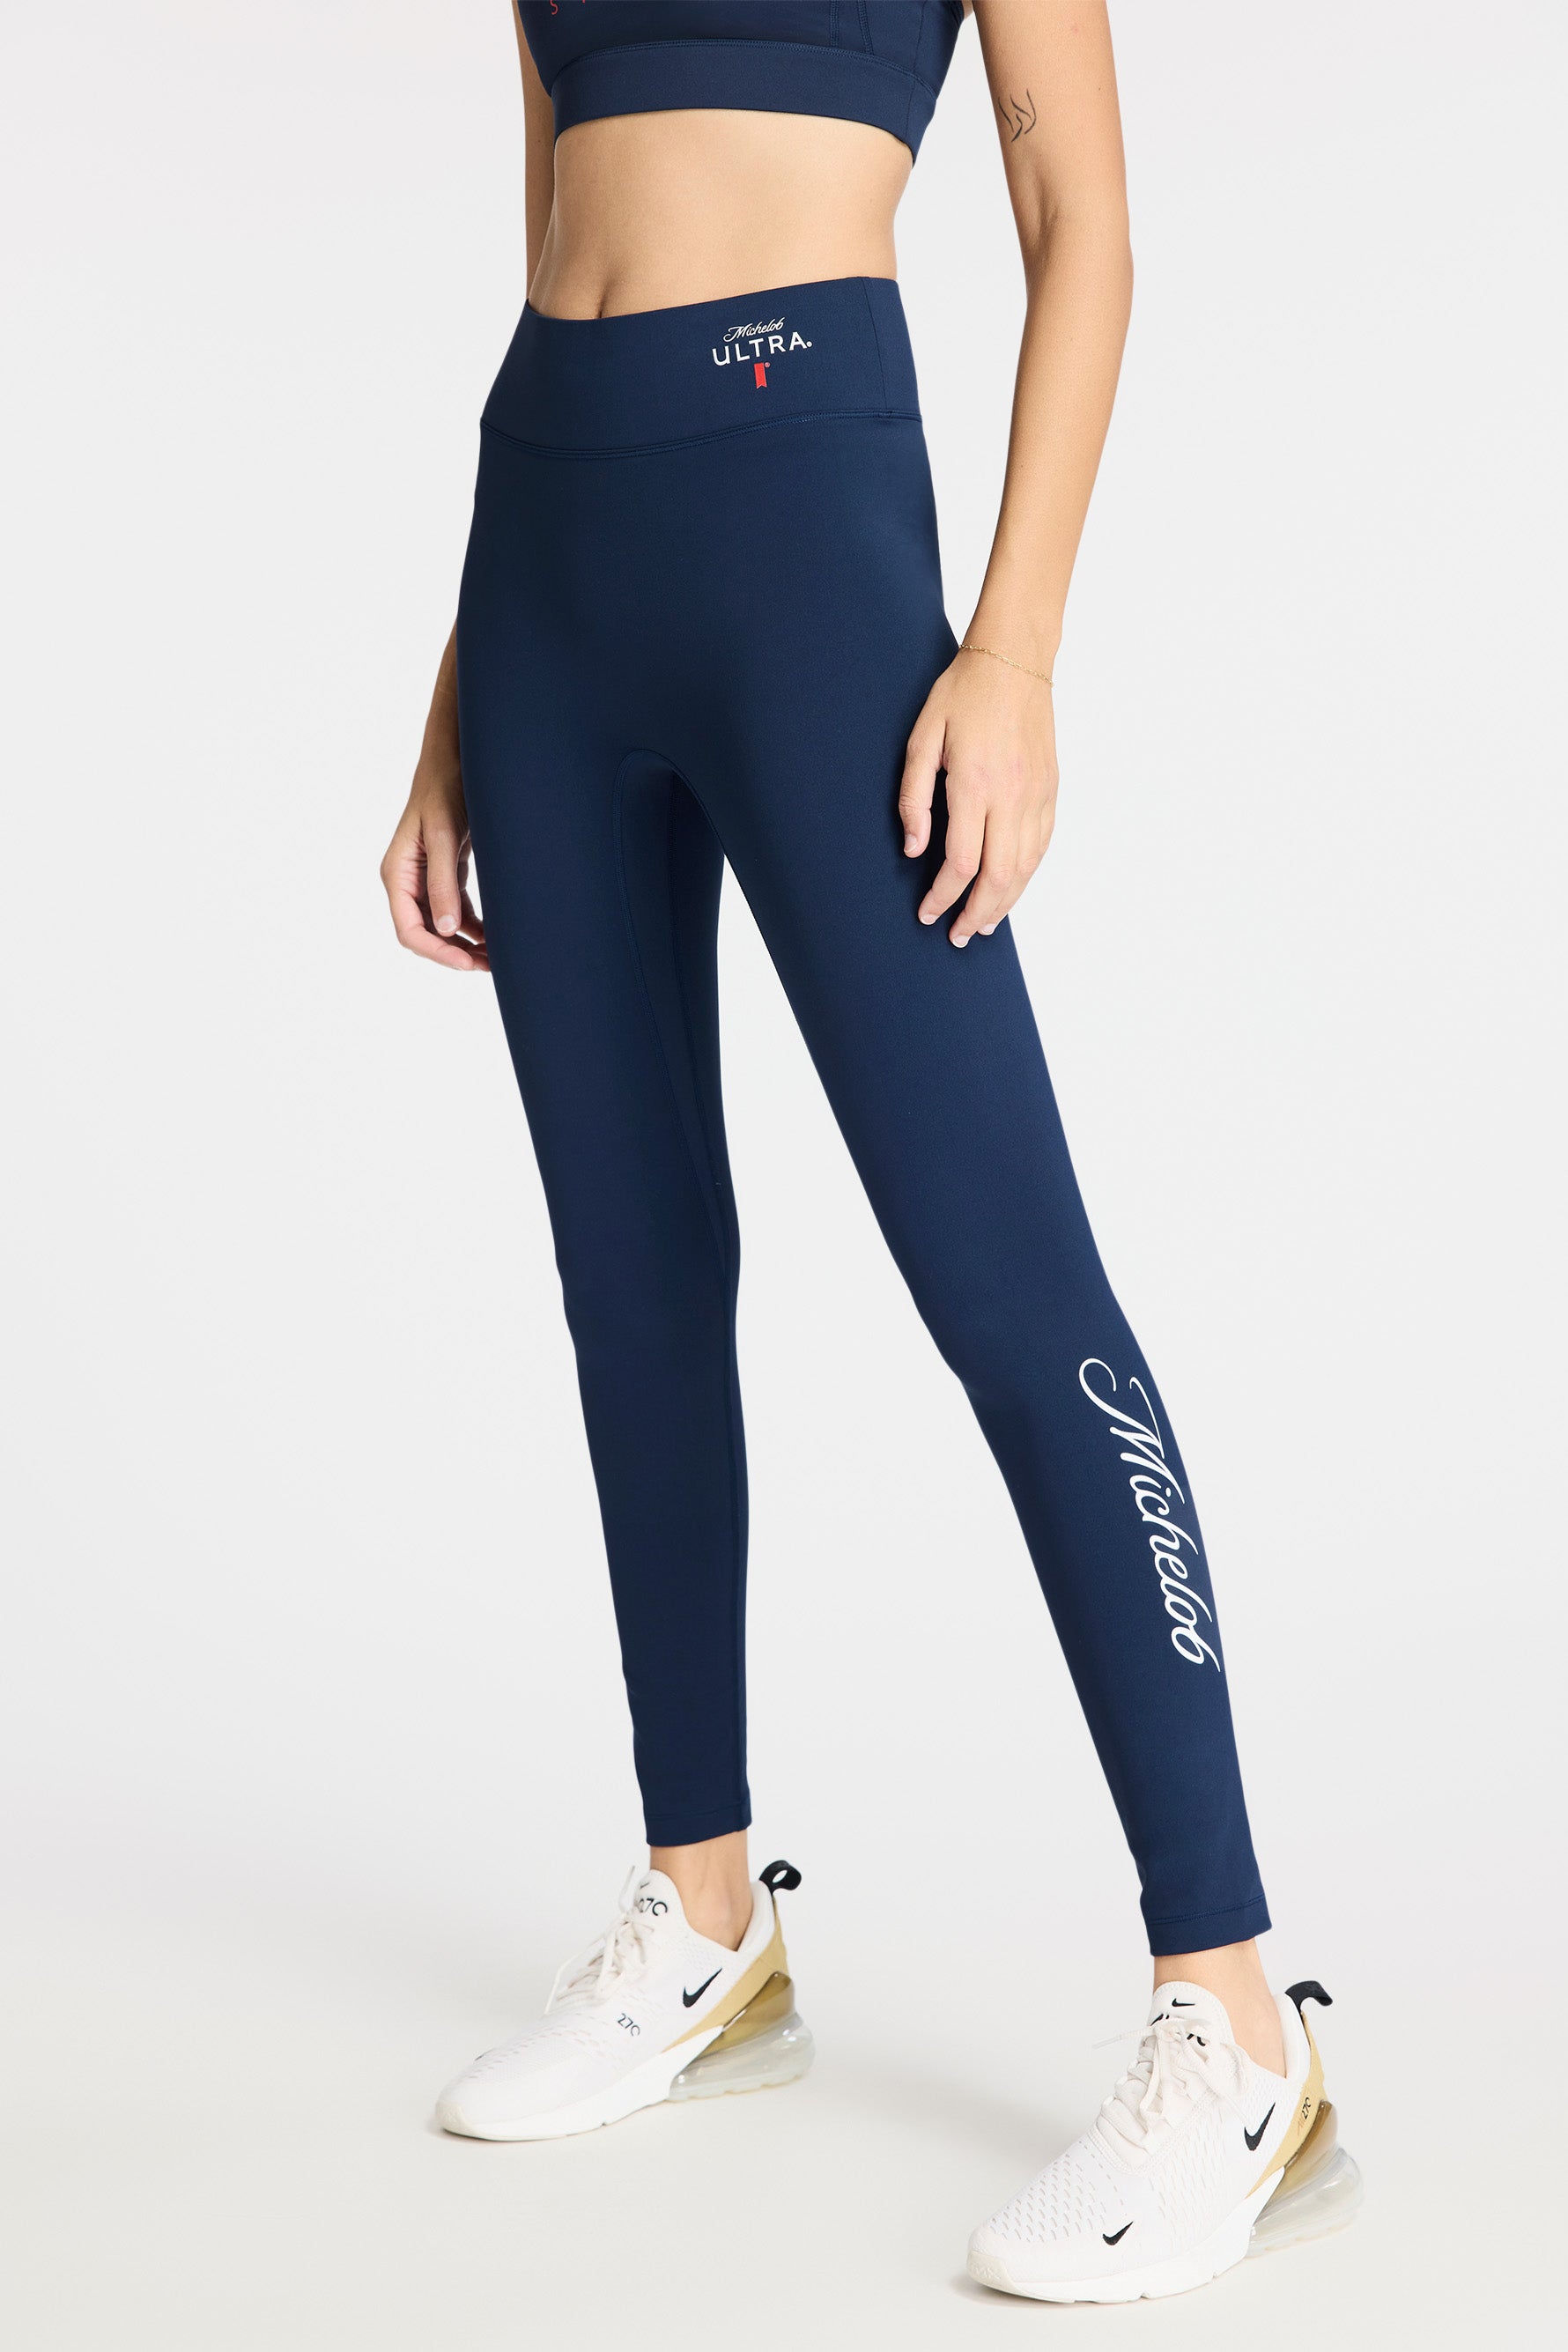 Bottom half of model wearing Bandier x Michelob ULTRA Center Stage Leggings, Michelob Ultra logo on left waistband, "Michelob" on left pants leg